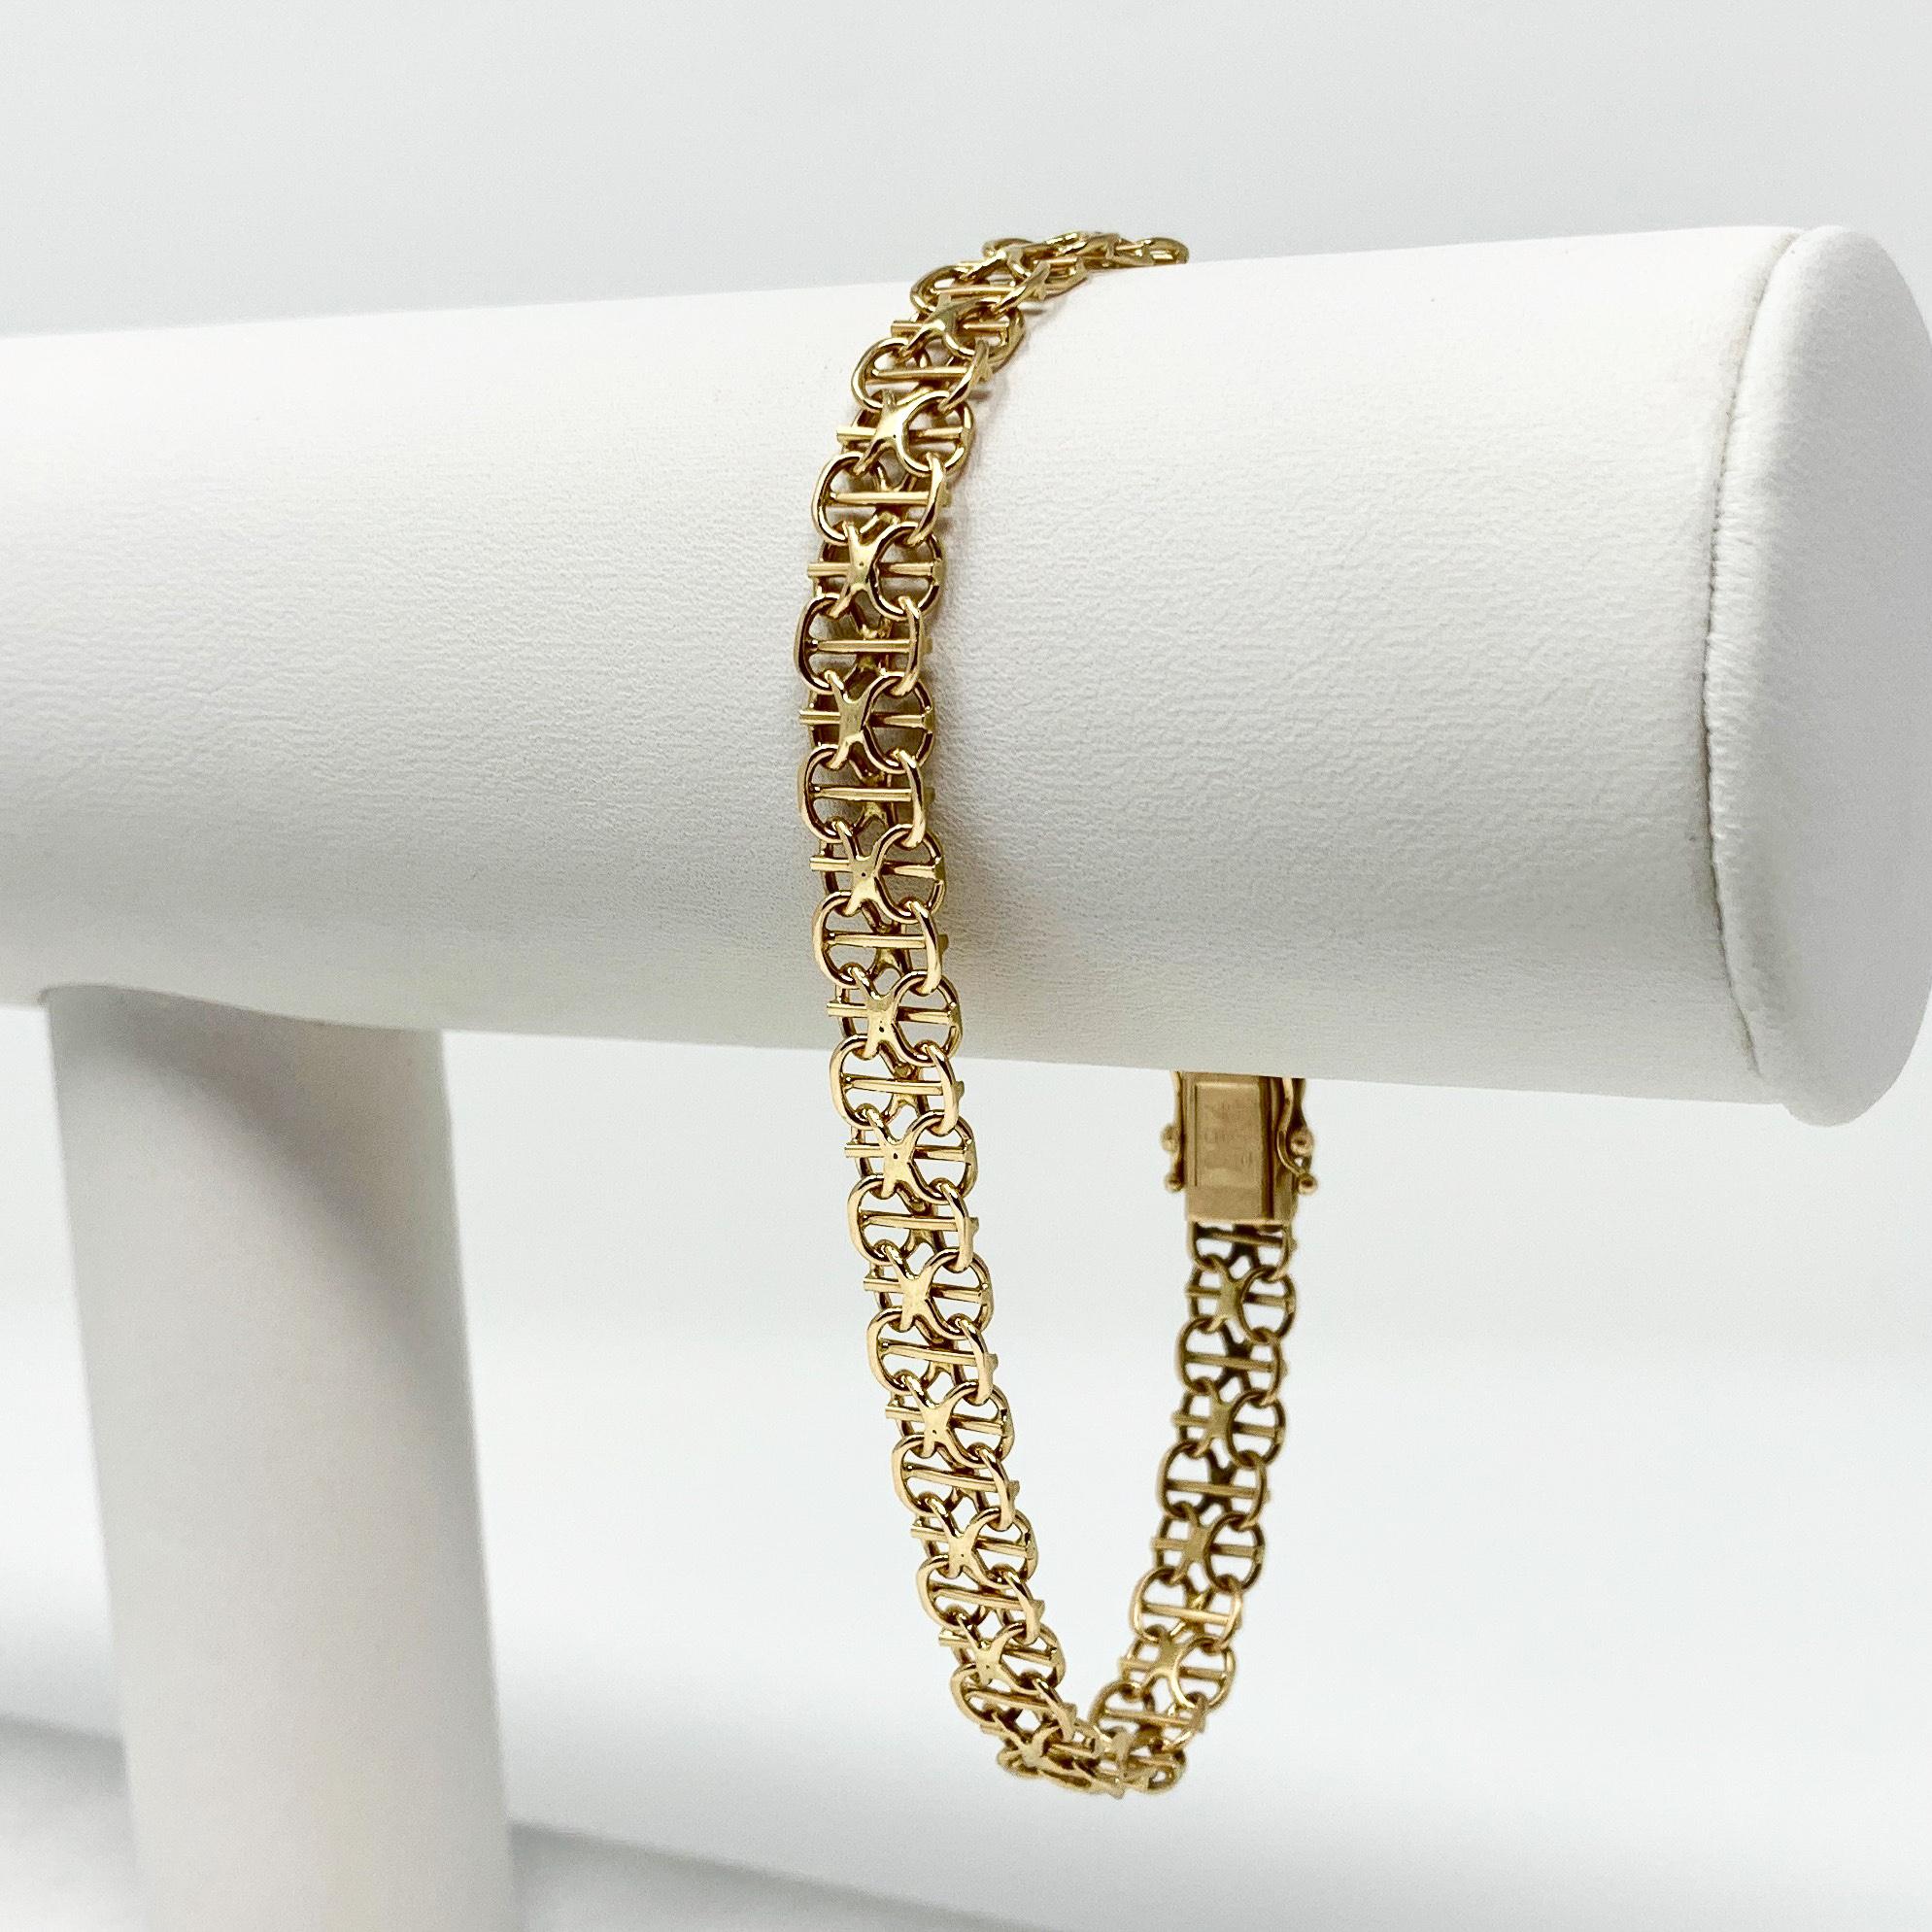 18k Yellow Gold 11.8g Bismark Link 7mm Chain Bracelet 8 Inches

Condition:  Excellent (Professionally Cleaned and Polished)
Metal:  18k Gold (Marked, and Professionally Tested)
Weight:  11.8g
Length:  8 Inches
Width:  7mm 
Closure:  Box Tab Insert